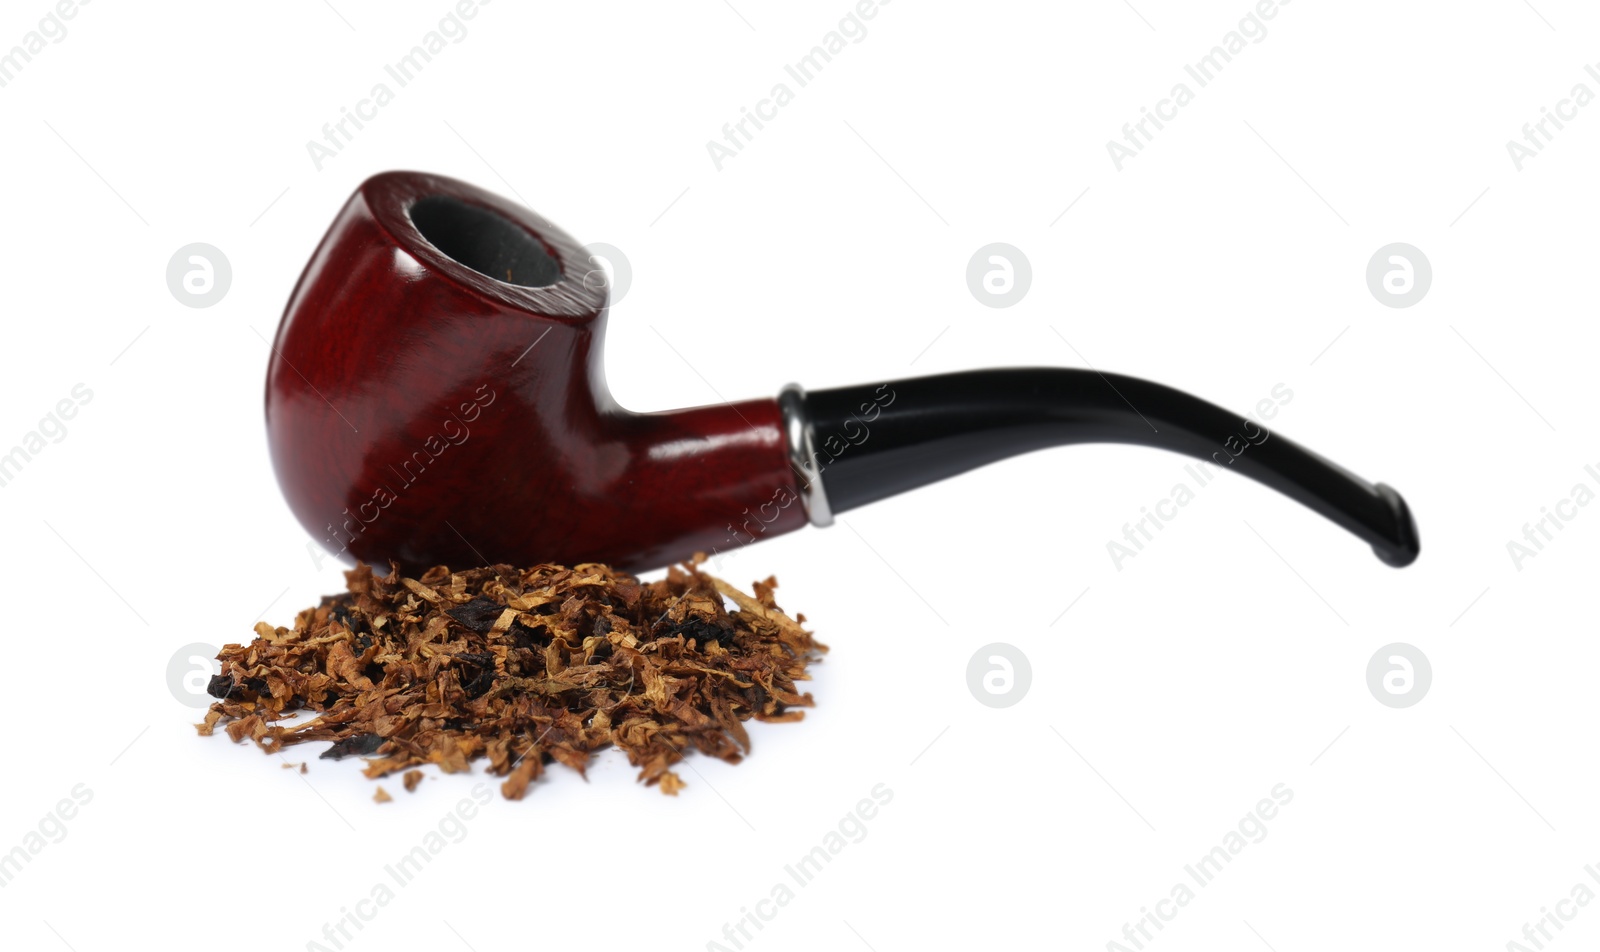 Photo of Pile of tobacco and smoking pipe on white background